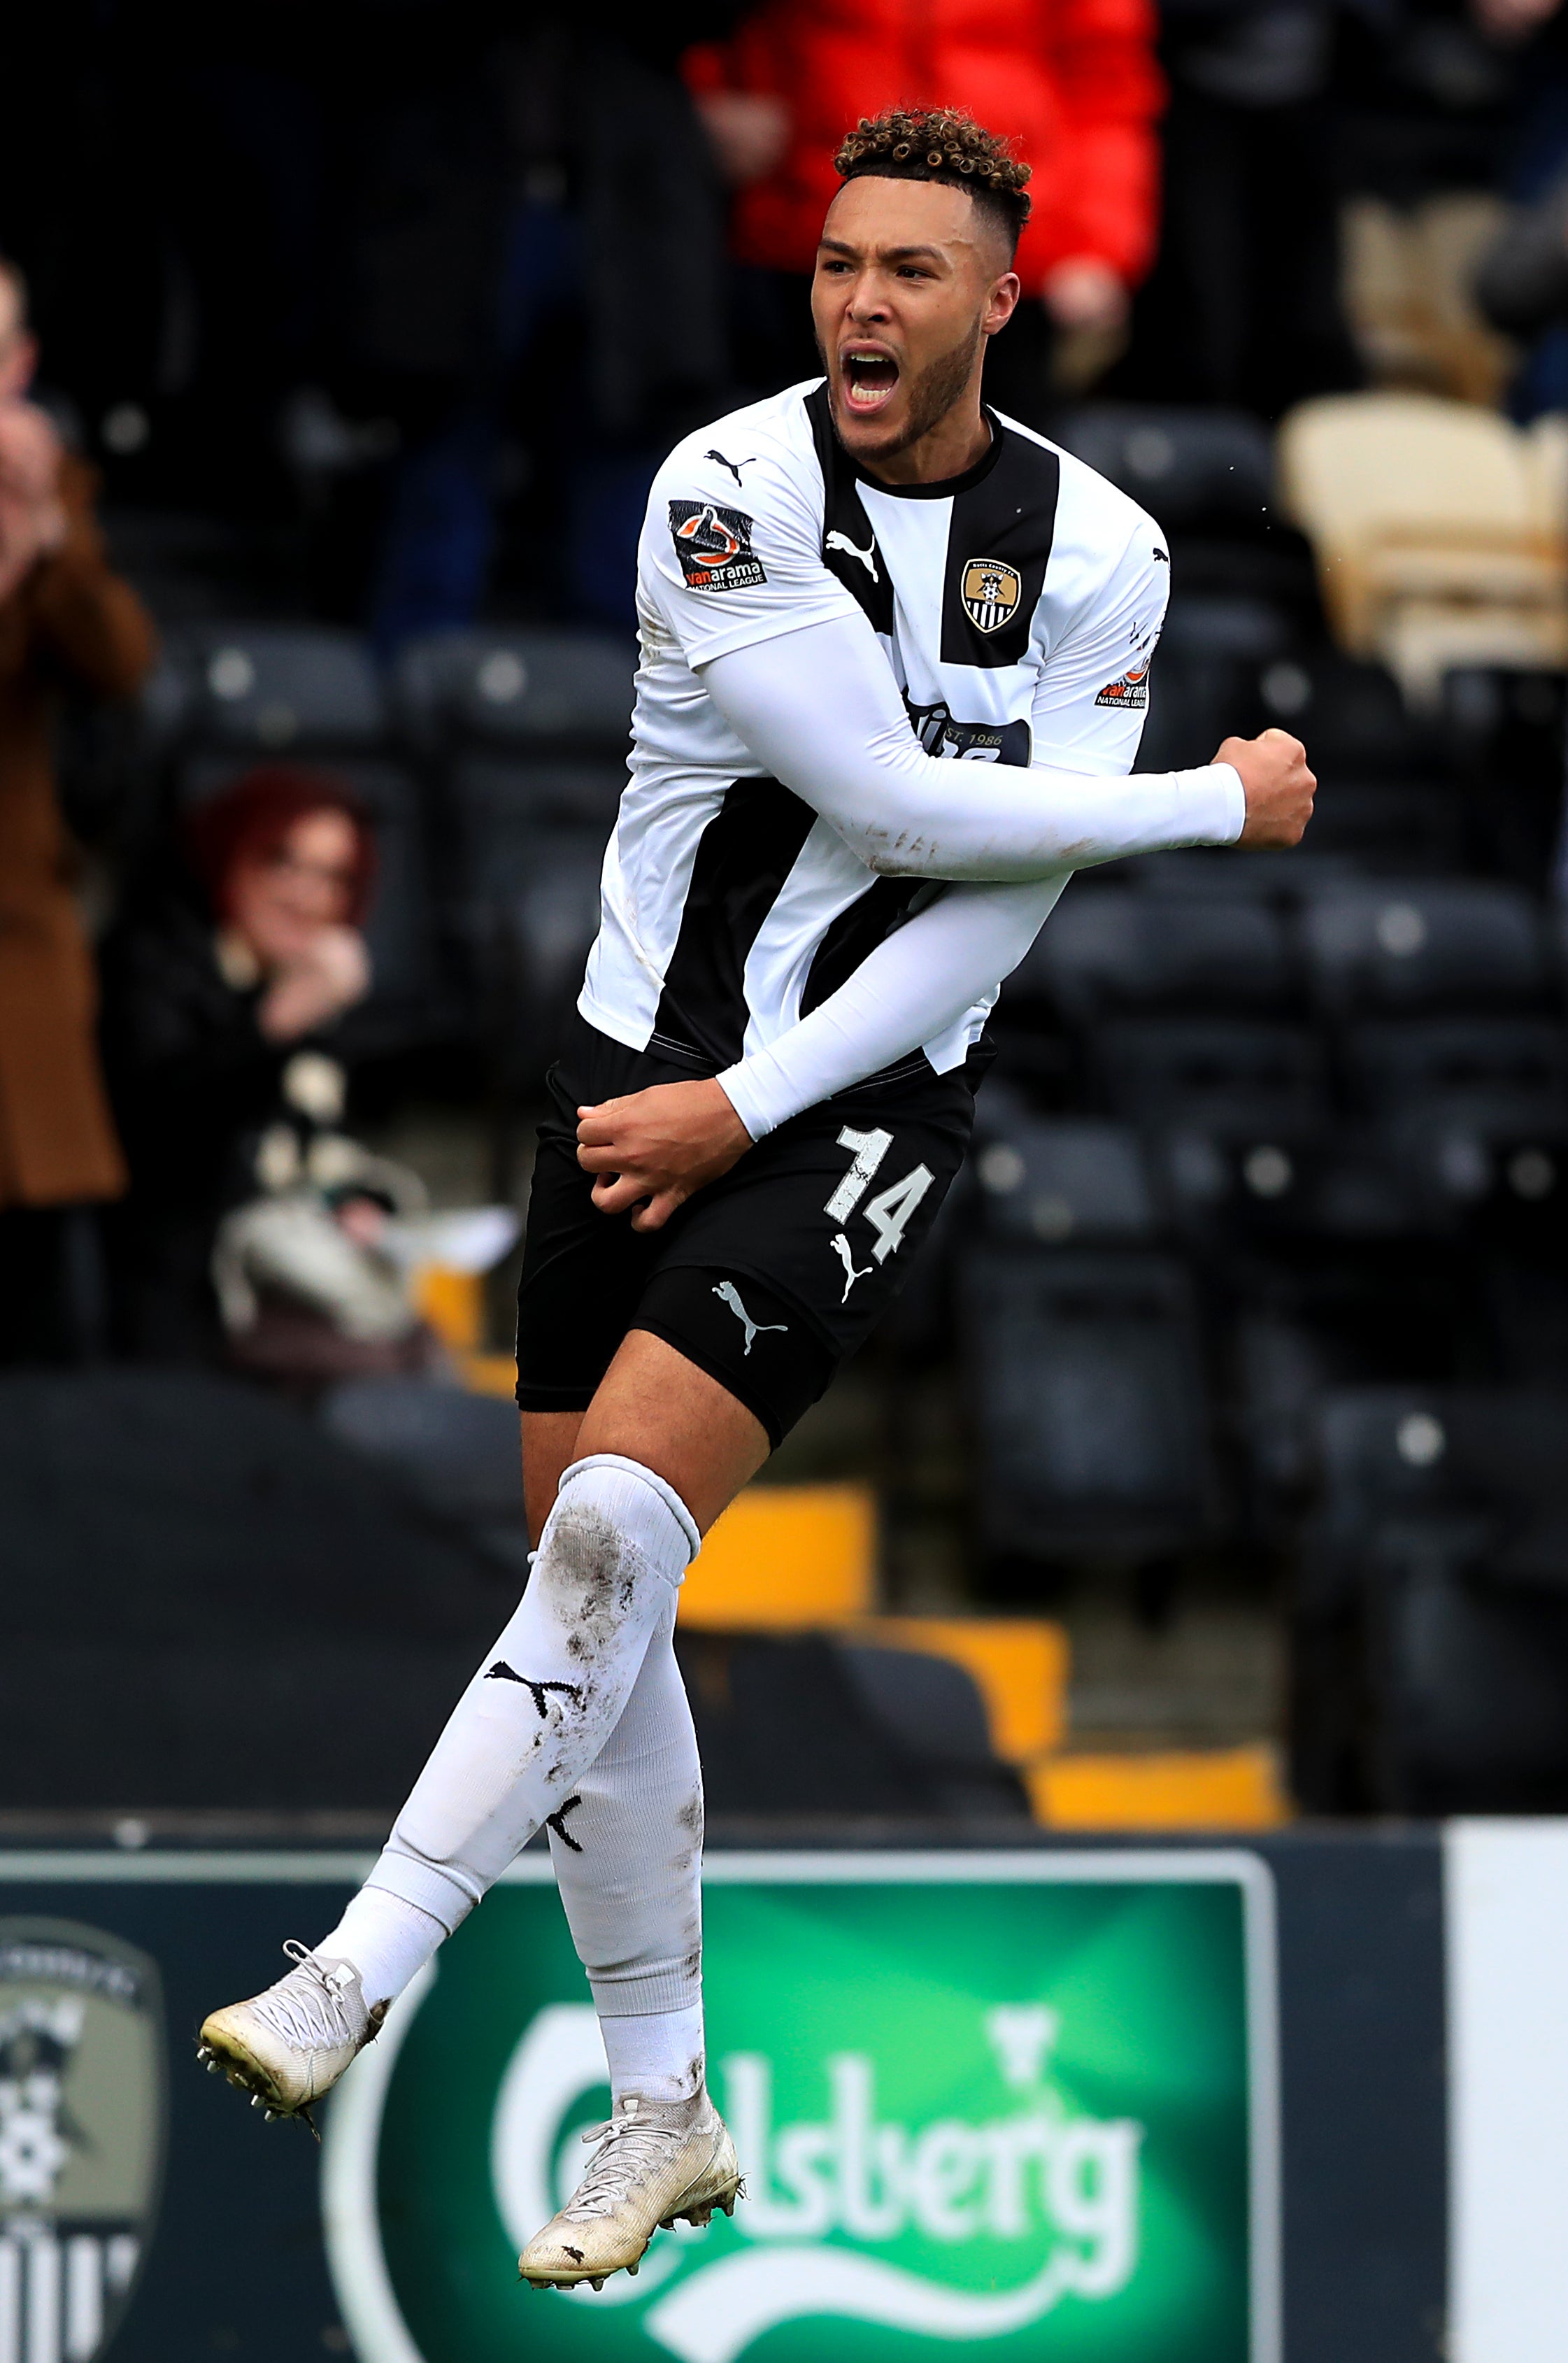 Kyle Wootton's double helped Notts County overcome Chesterfield.